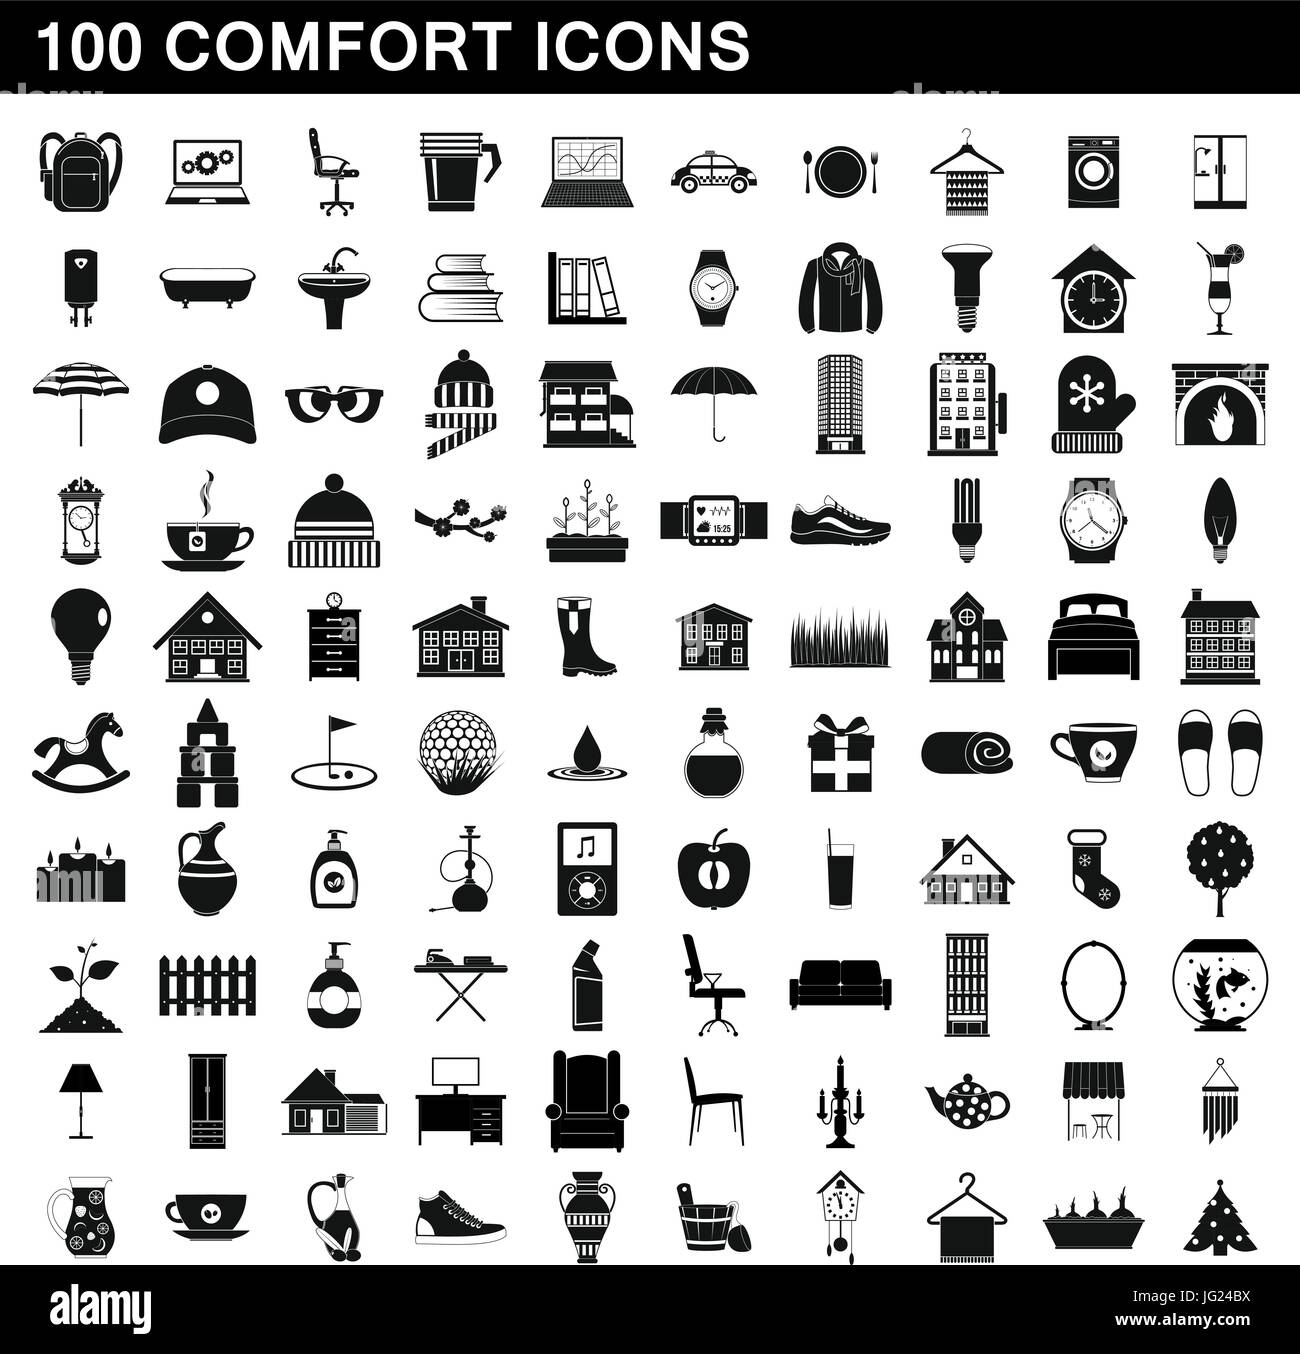 100 comfort icons set, simple style Stock Vector